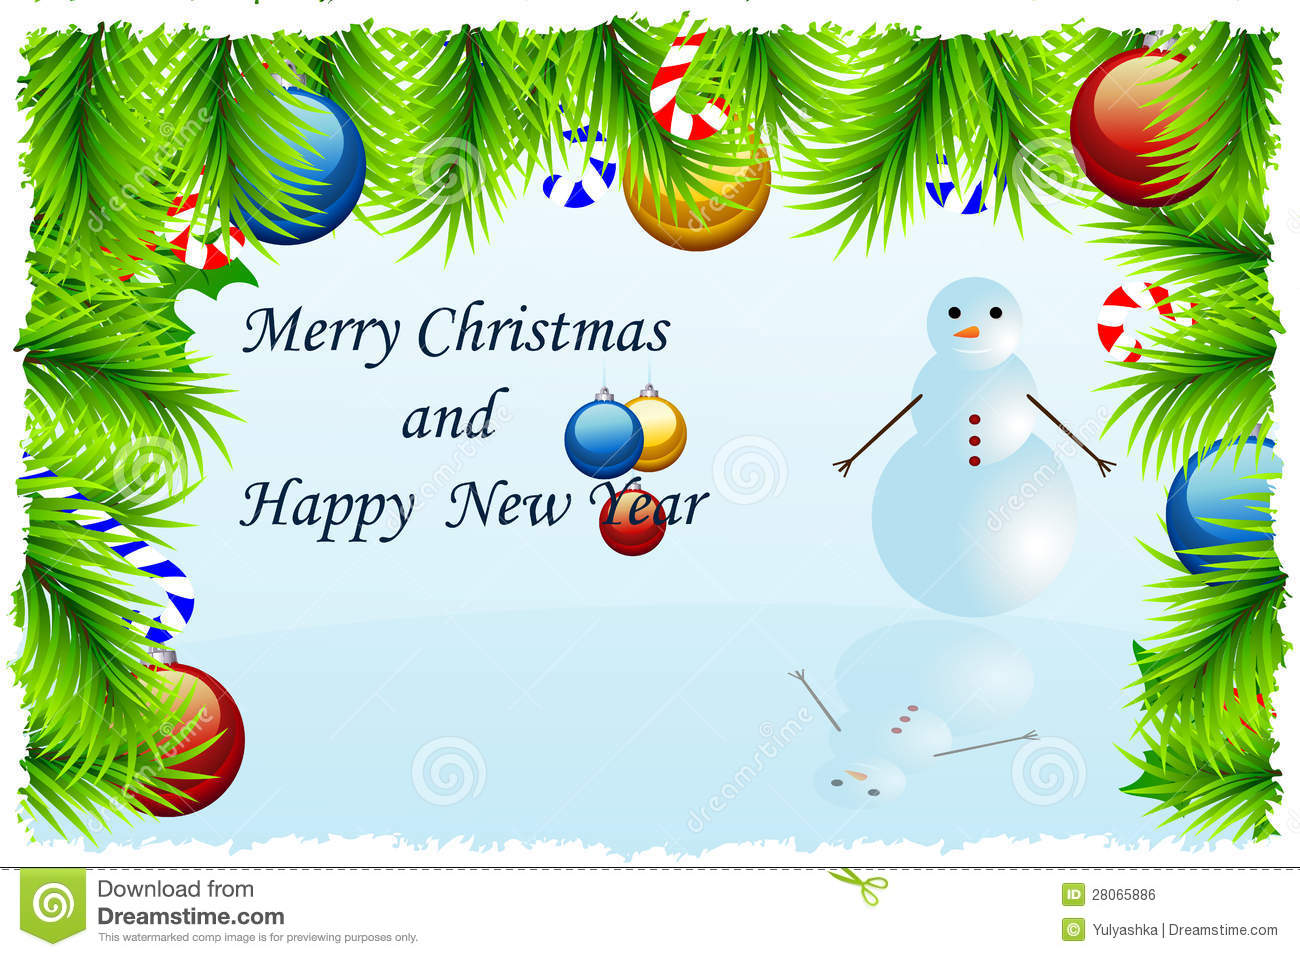 16-holiday-greeting-card-template-images-free-christmas-card-design-templates-free-email